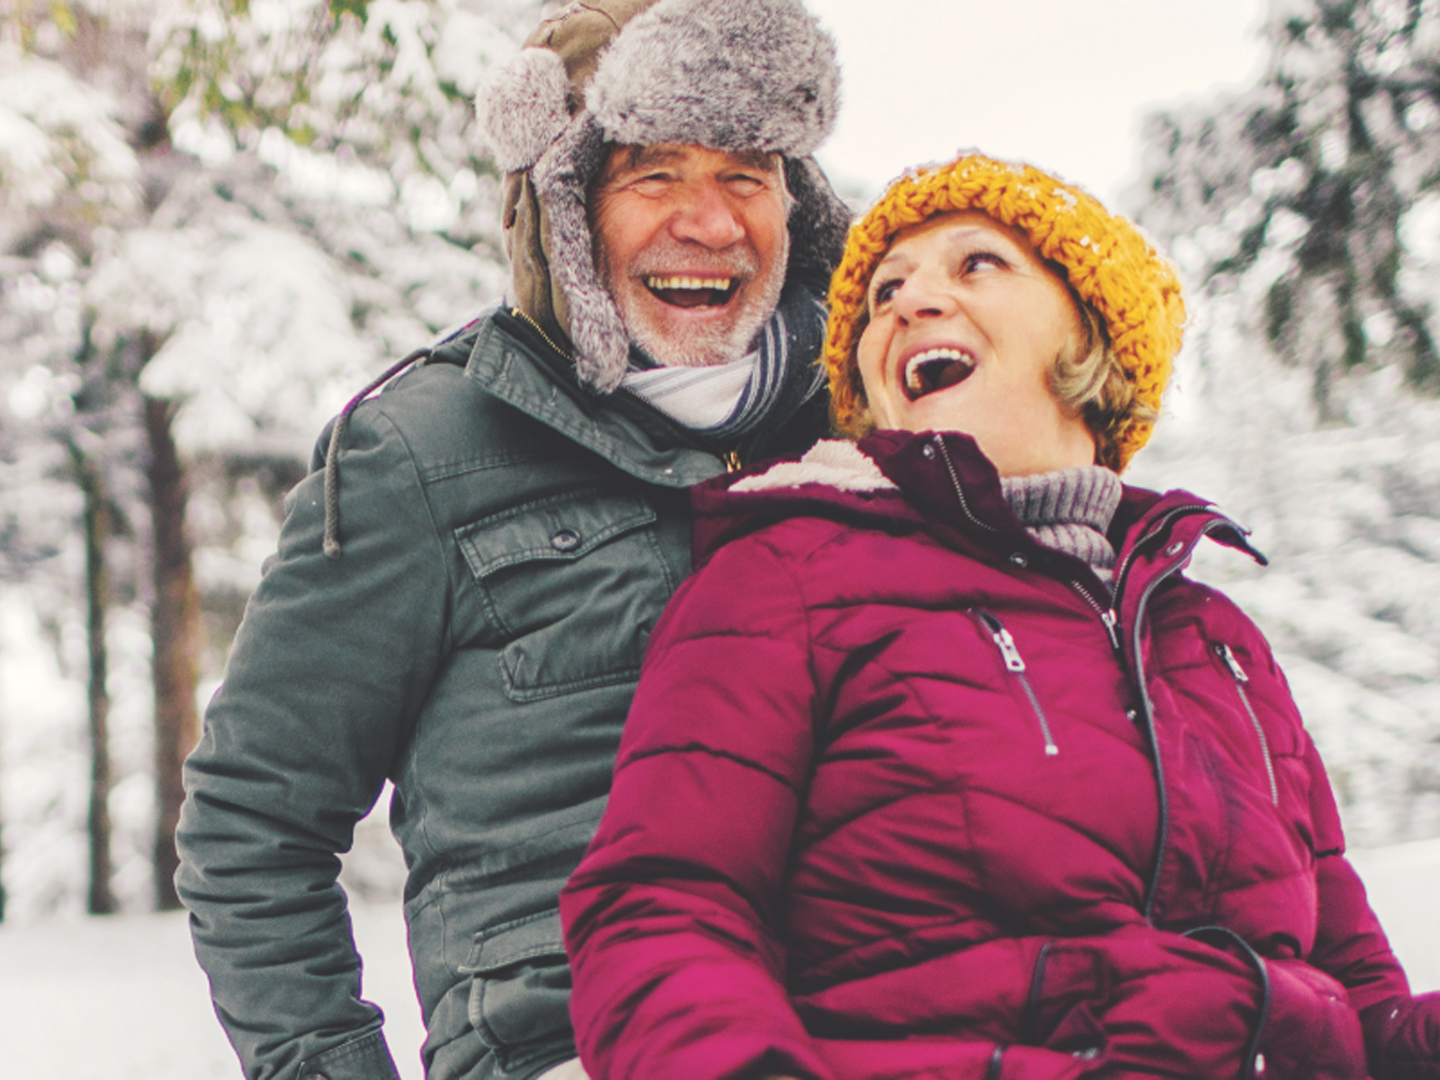 Man and woman laughing wearing winter hat and jackets while sitting in the snow.